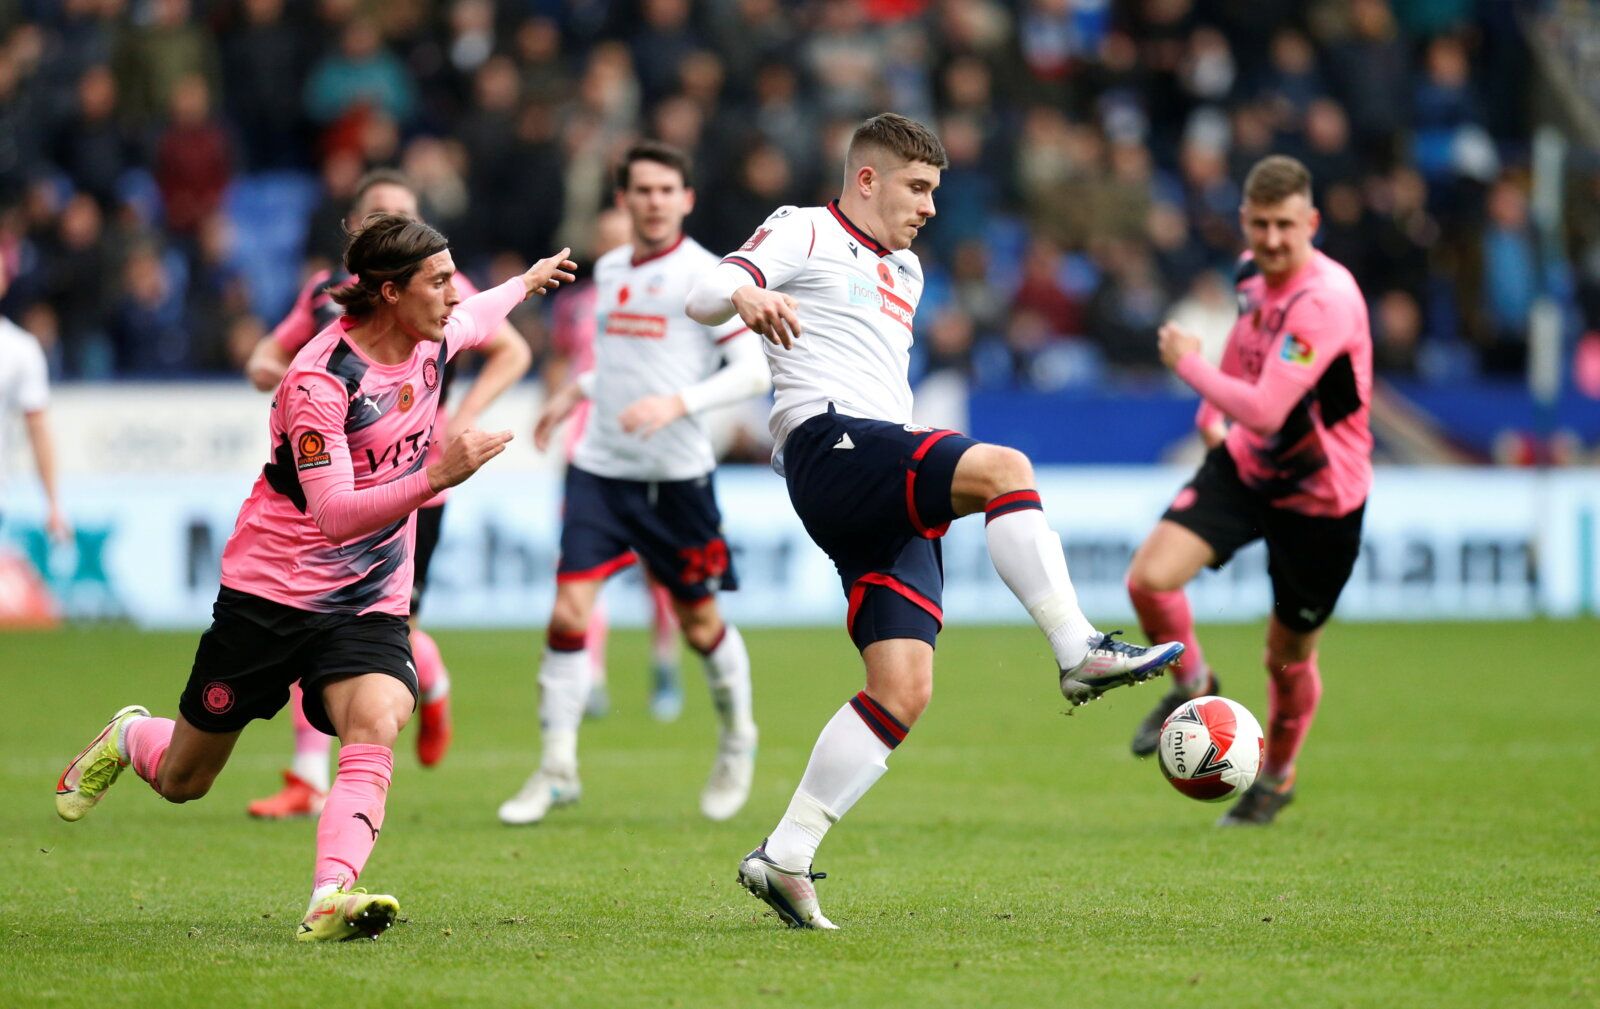 Soccer Football - FA Cup - First Round - Bolton Wanderers v Stockport County - University of Bolton Stadium, Bolton, Britain - November 7, 2021 Bolton Wanderers' Declan John in action with Stockport County's Ollie Crankshaw